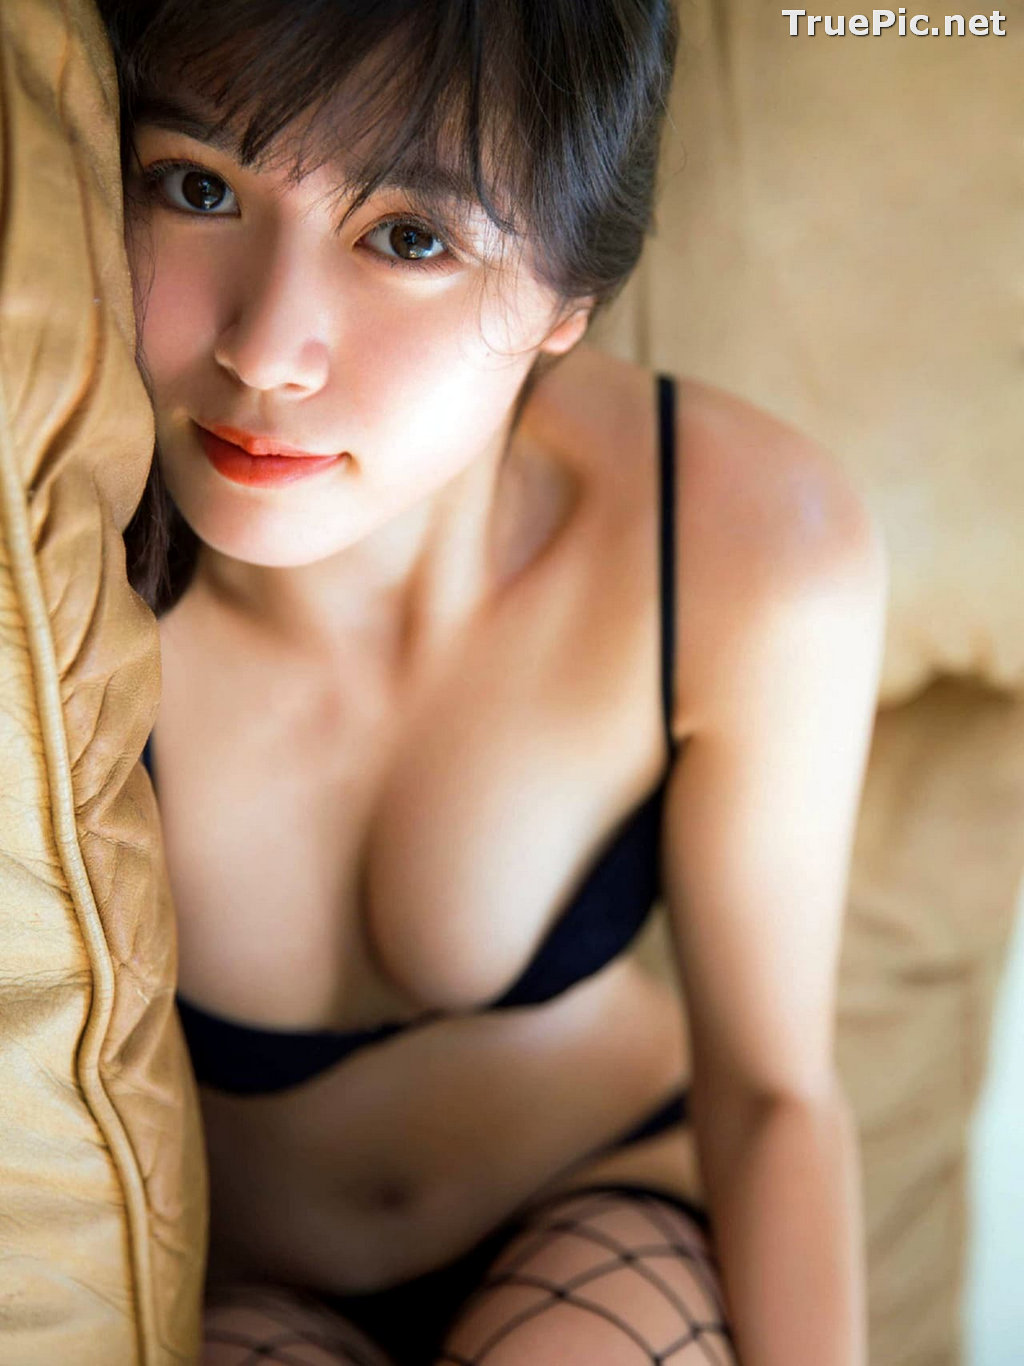 ImageJapanese Gravure Idol and Actress - Kitamuki Miyu (北向珠夕) - Sexy Picture Collection 2020 - TruePic.net - Picture-65